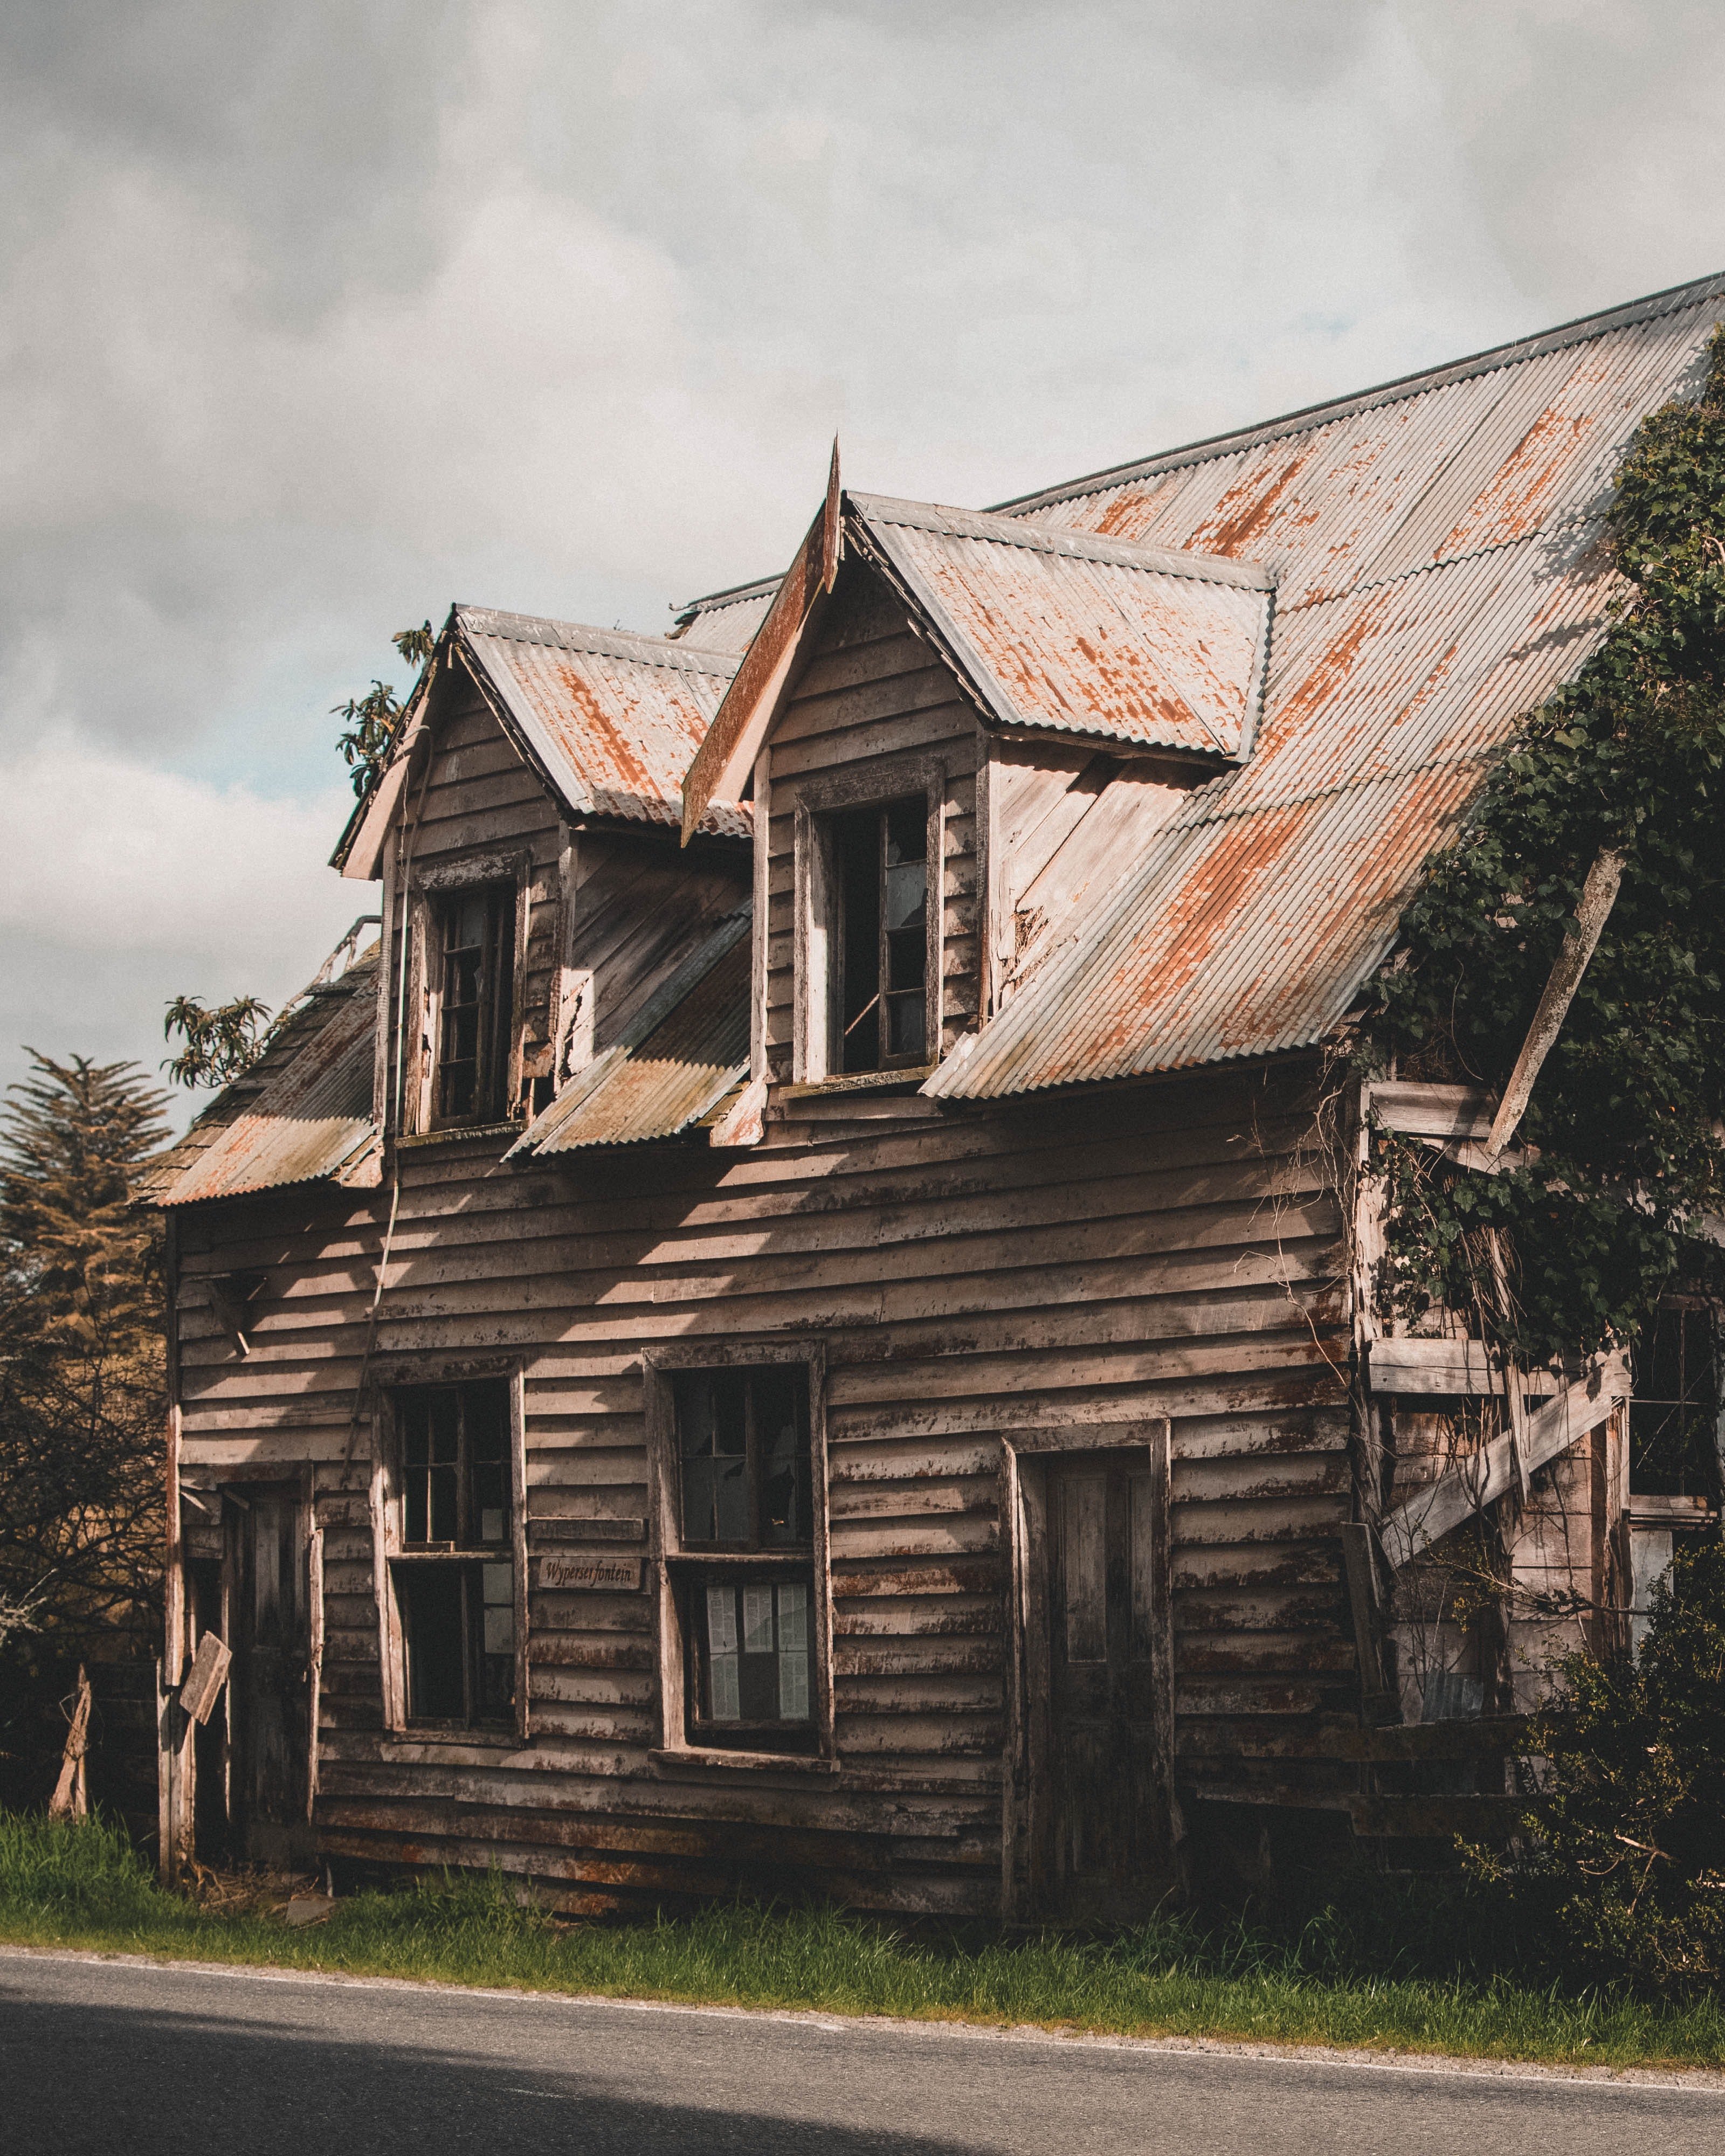 Miss Wilson saw Isabella approach an abandoned house instead of her own. | Source: Pexels